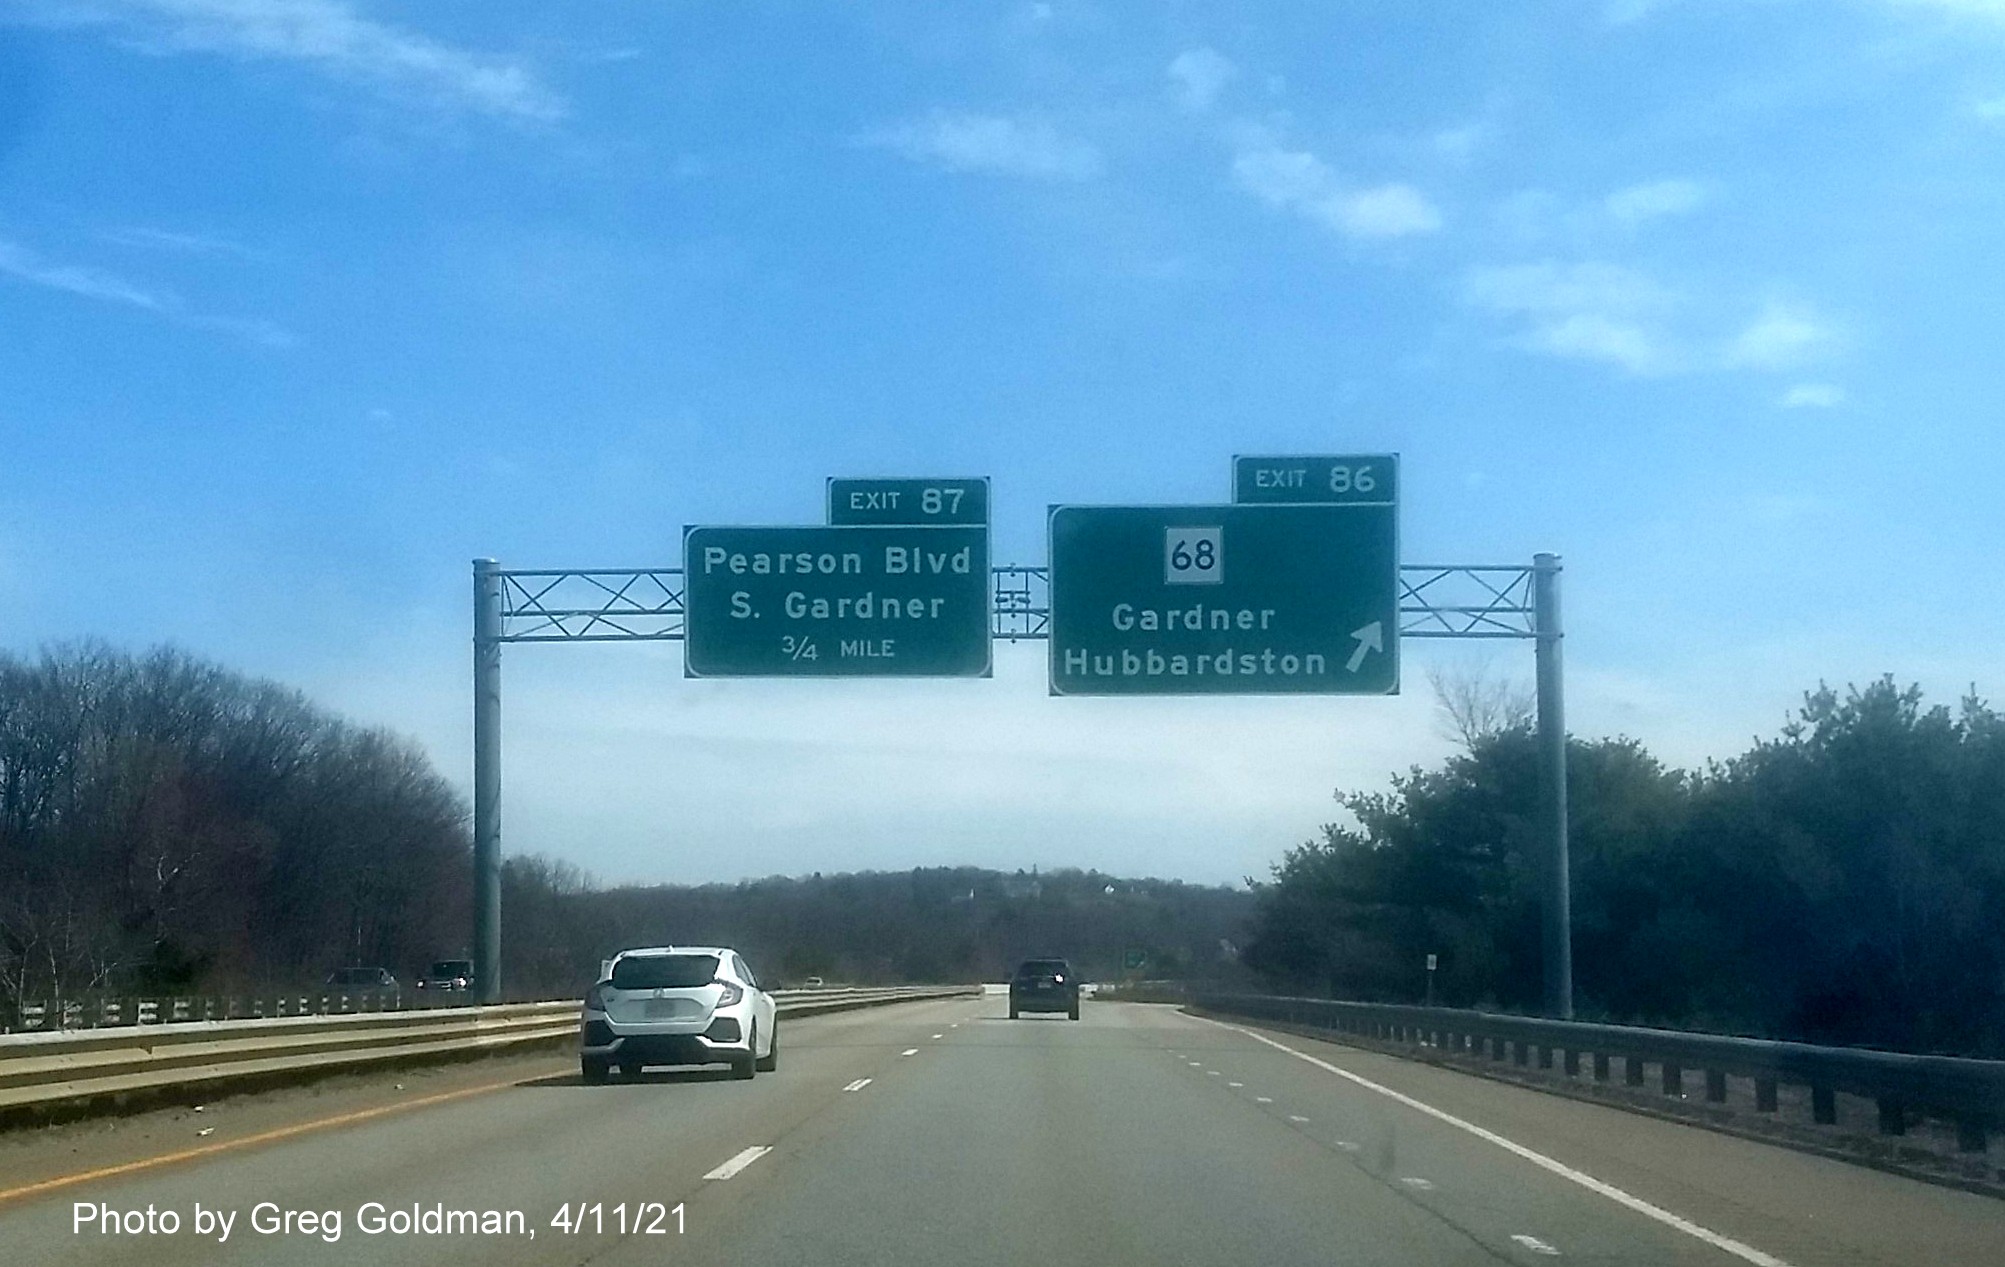 Image of overhead ramp sign for MA 68 Exit with new milepost based exit number on MA 2 East in Gardner, by Greg Goldman, April 2021